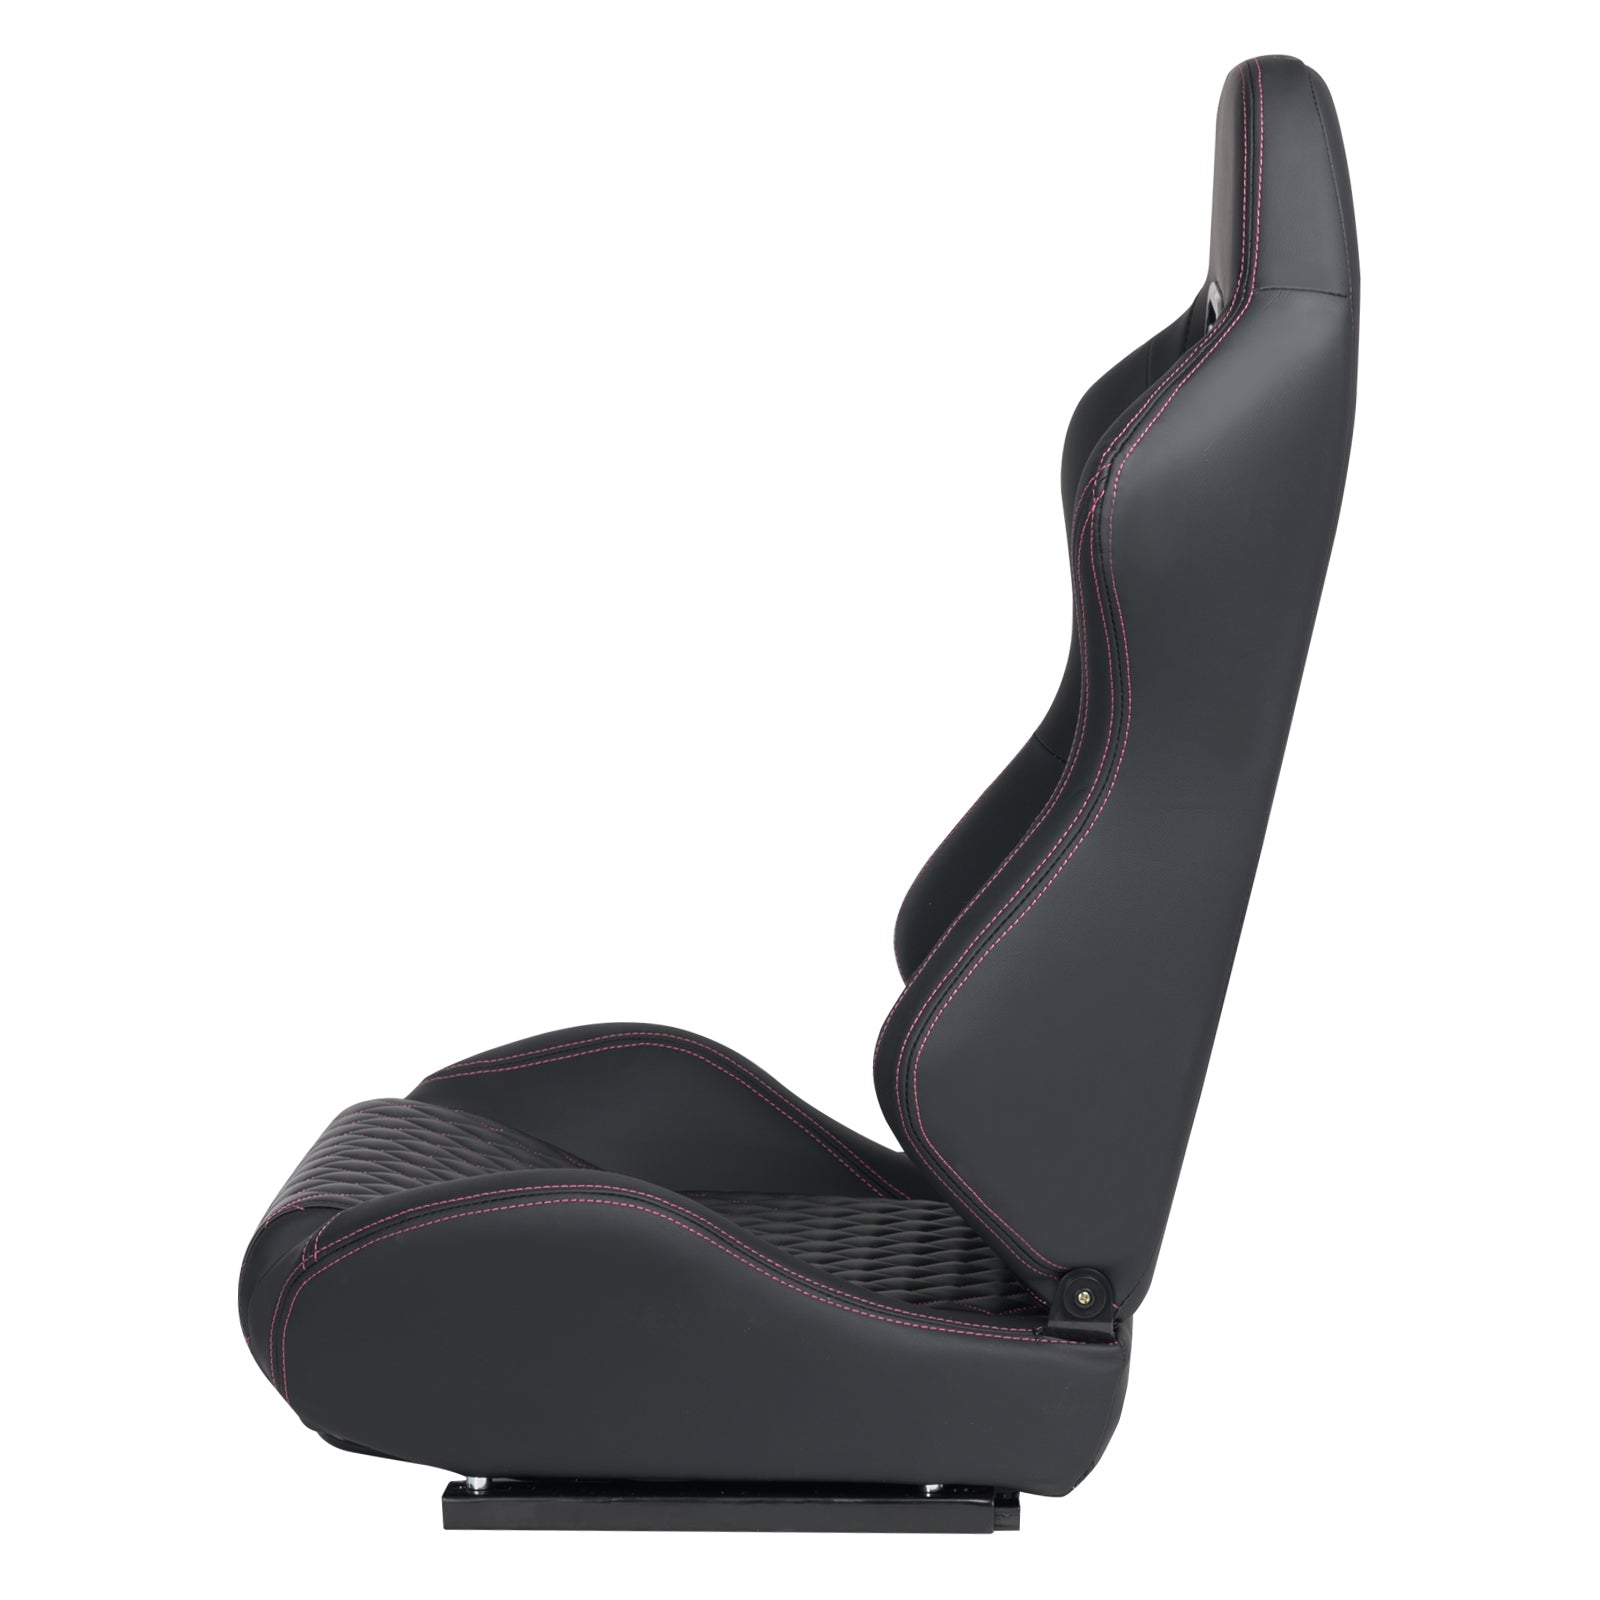 Racing Seat High Quality Pvc With Suade Material